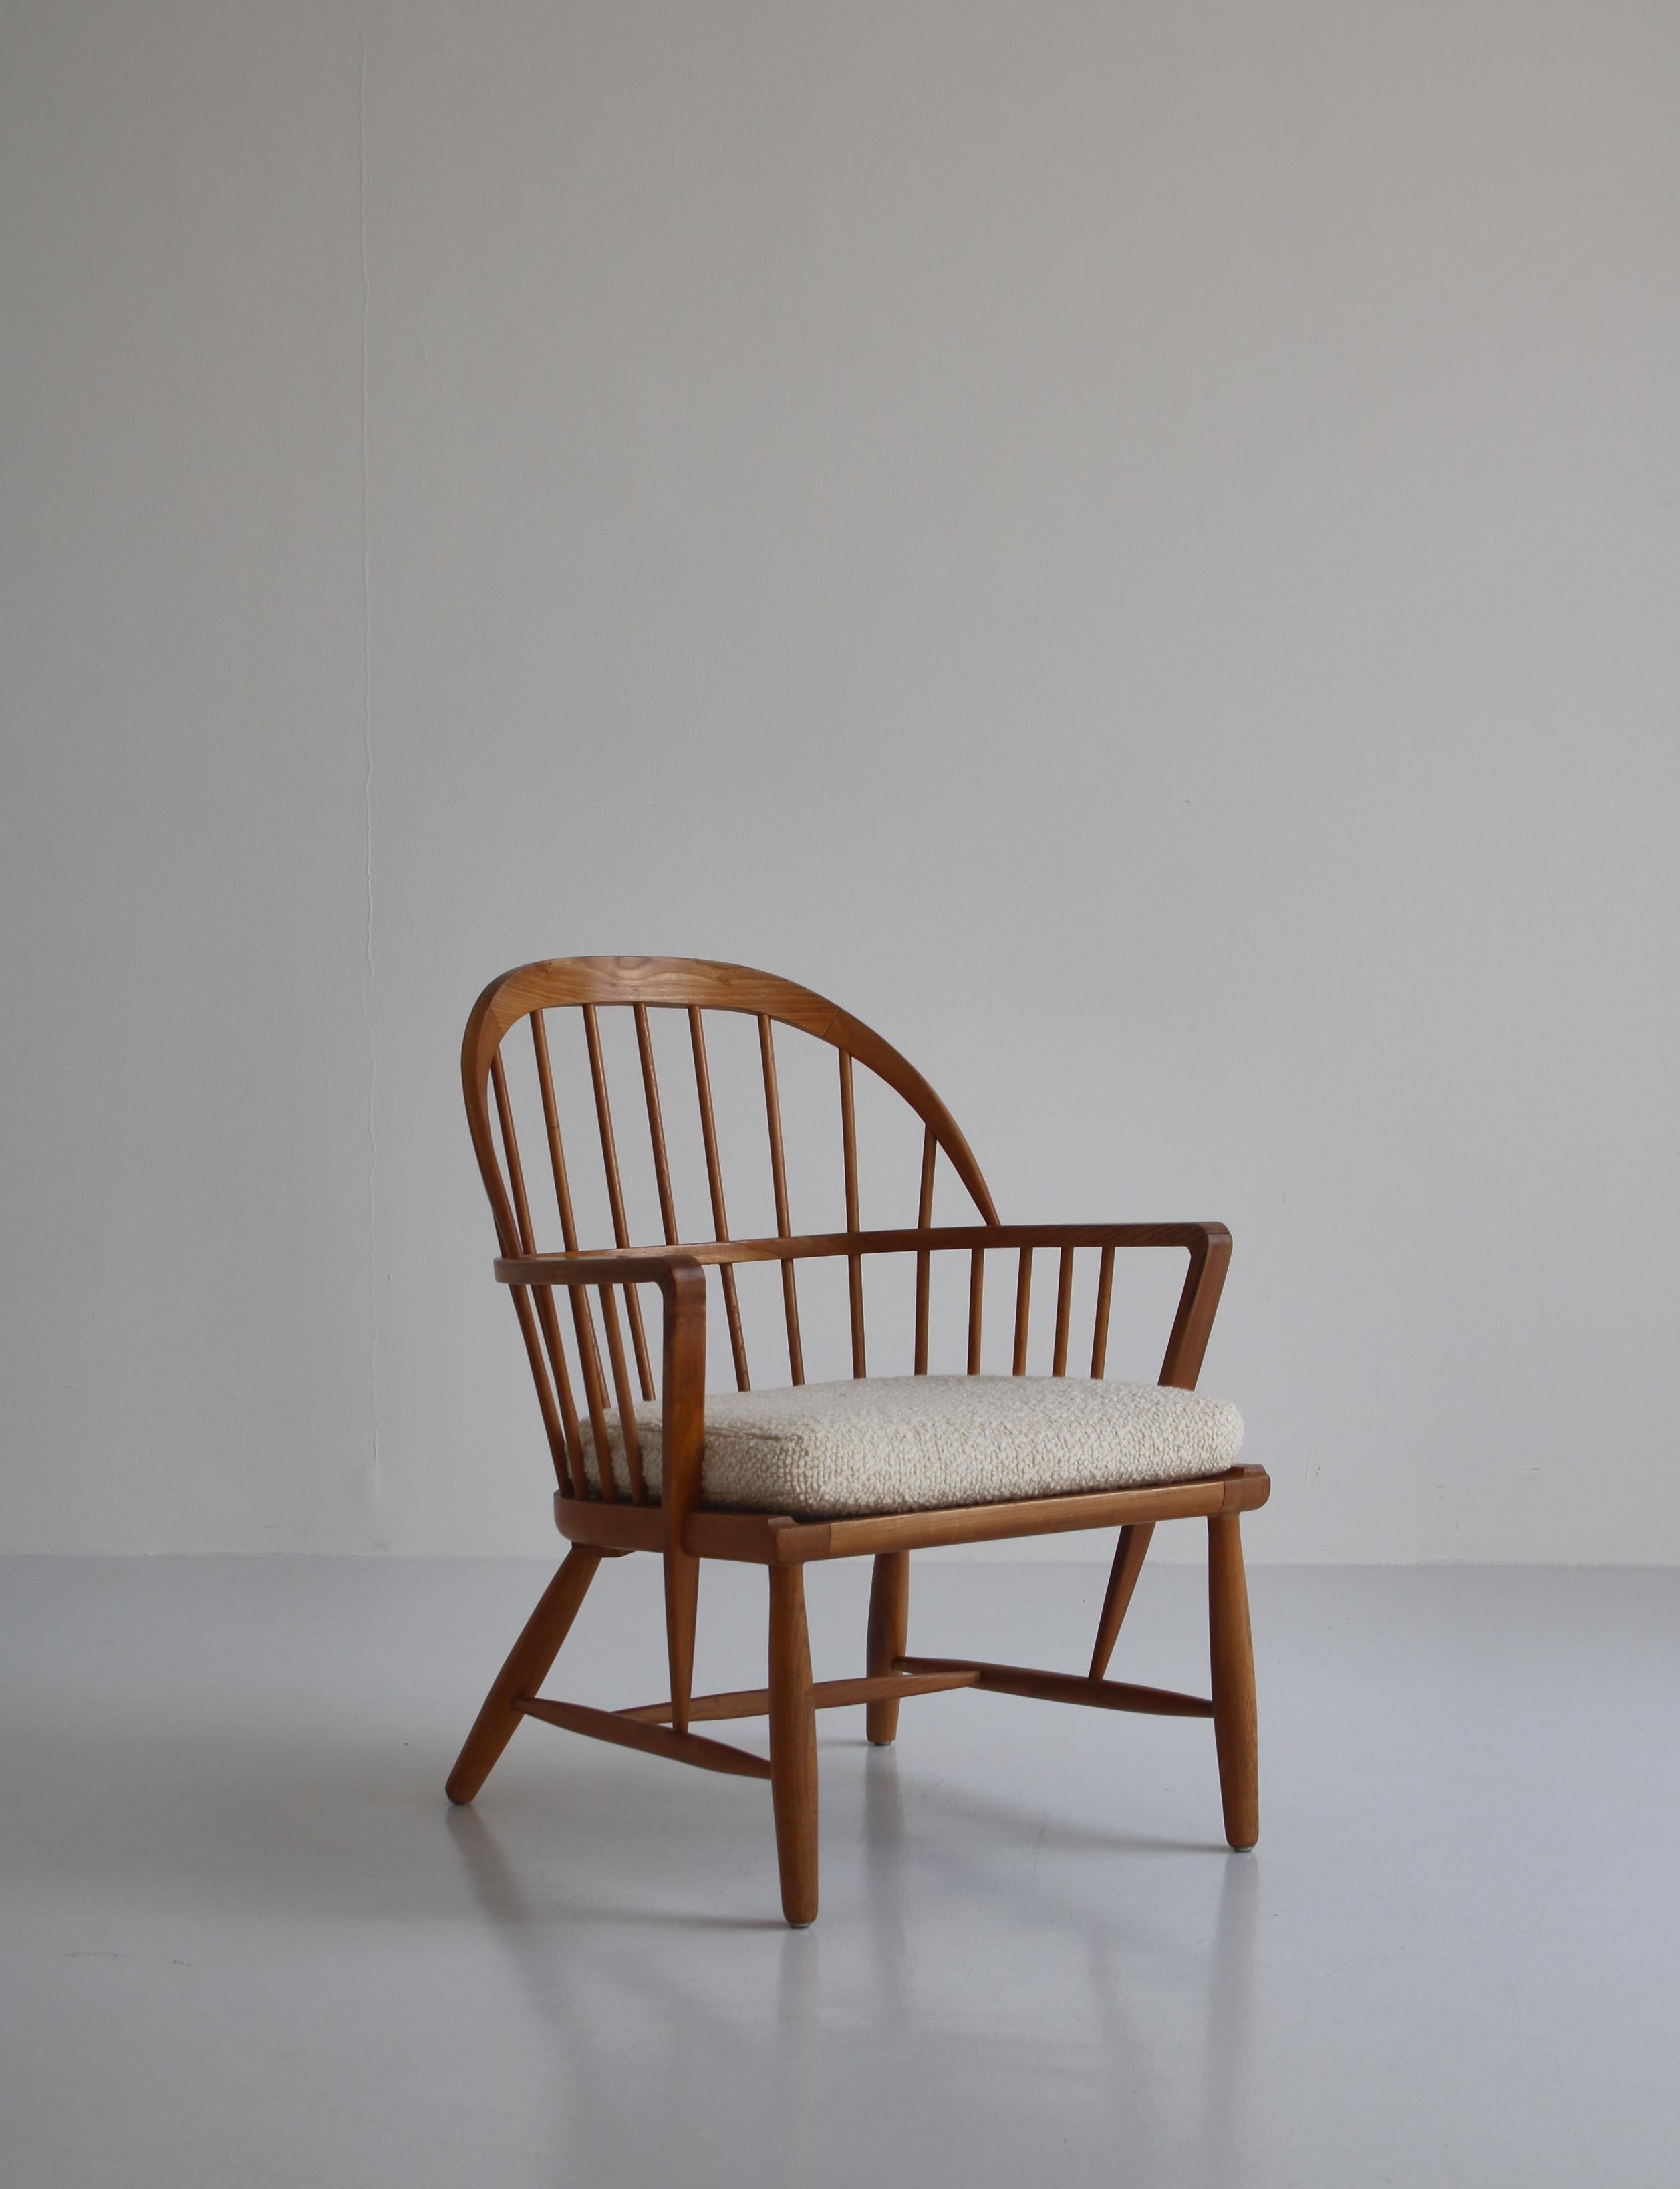 Mid-20th Century Scandinavian Modern Windsor Chair in Patinated Ash and White Boucle